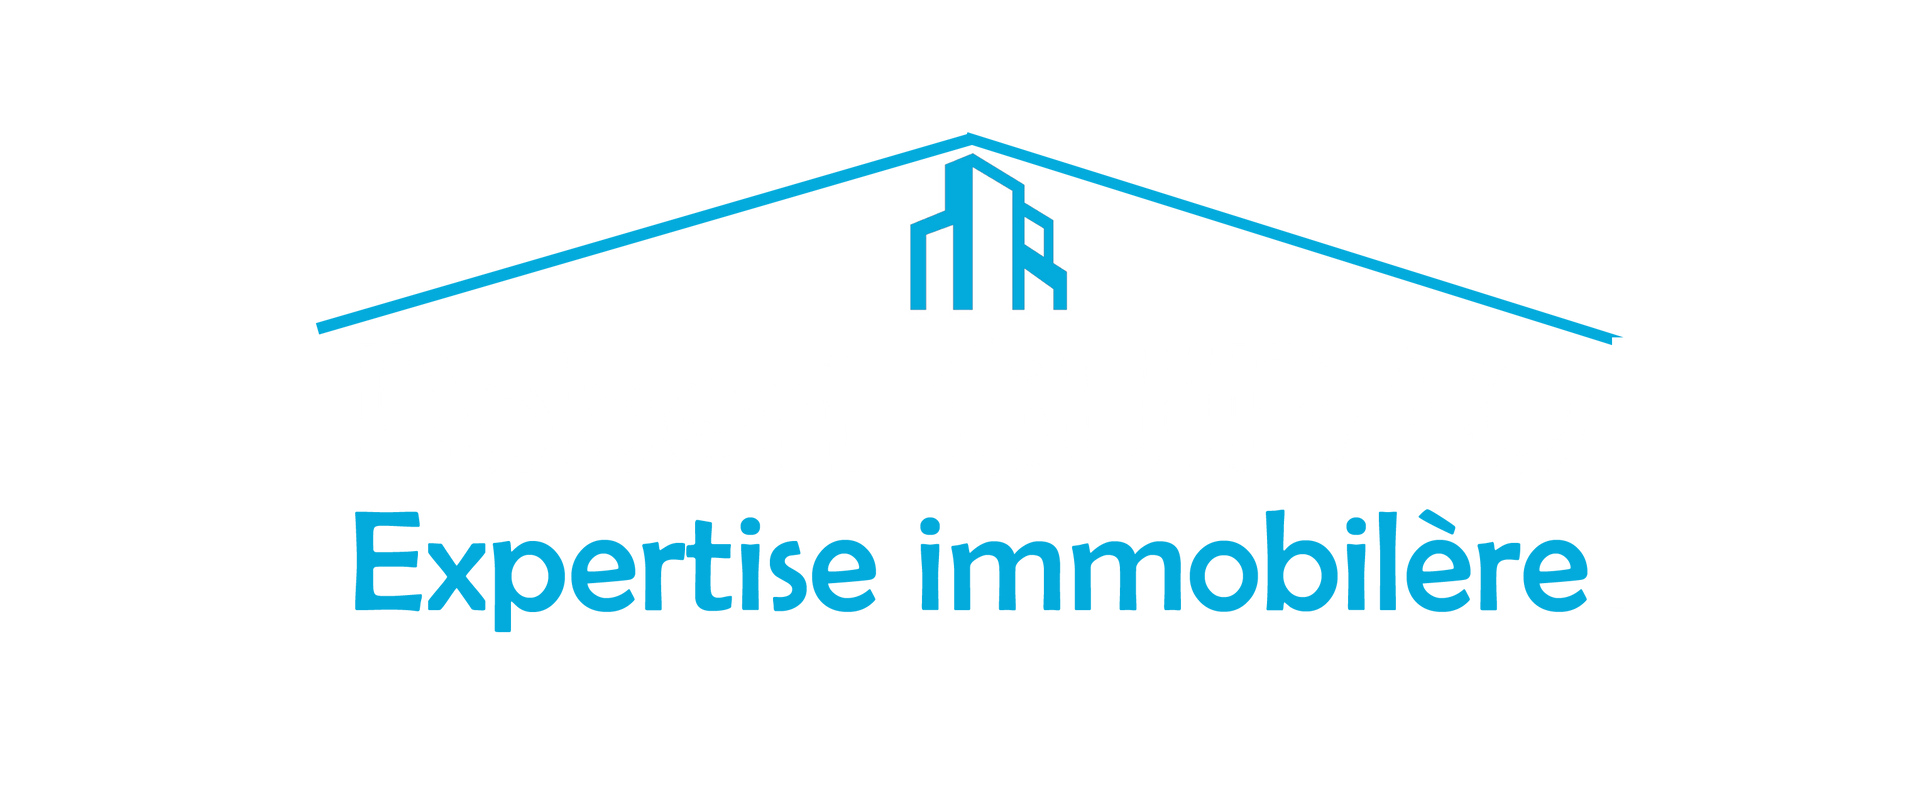 EXPERTISES-IMMOBILIERES-ET-COMMERCIALES-LOGO